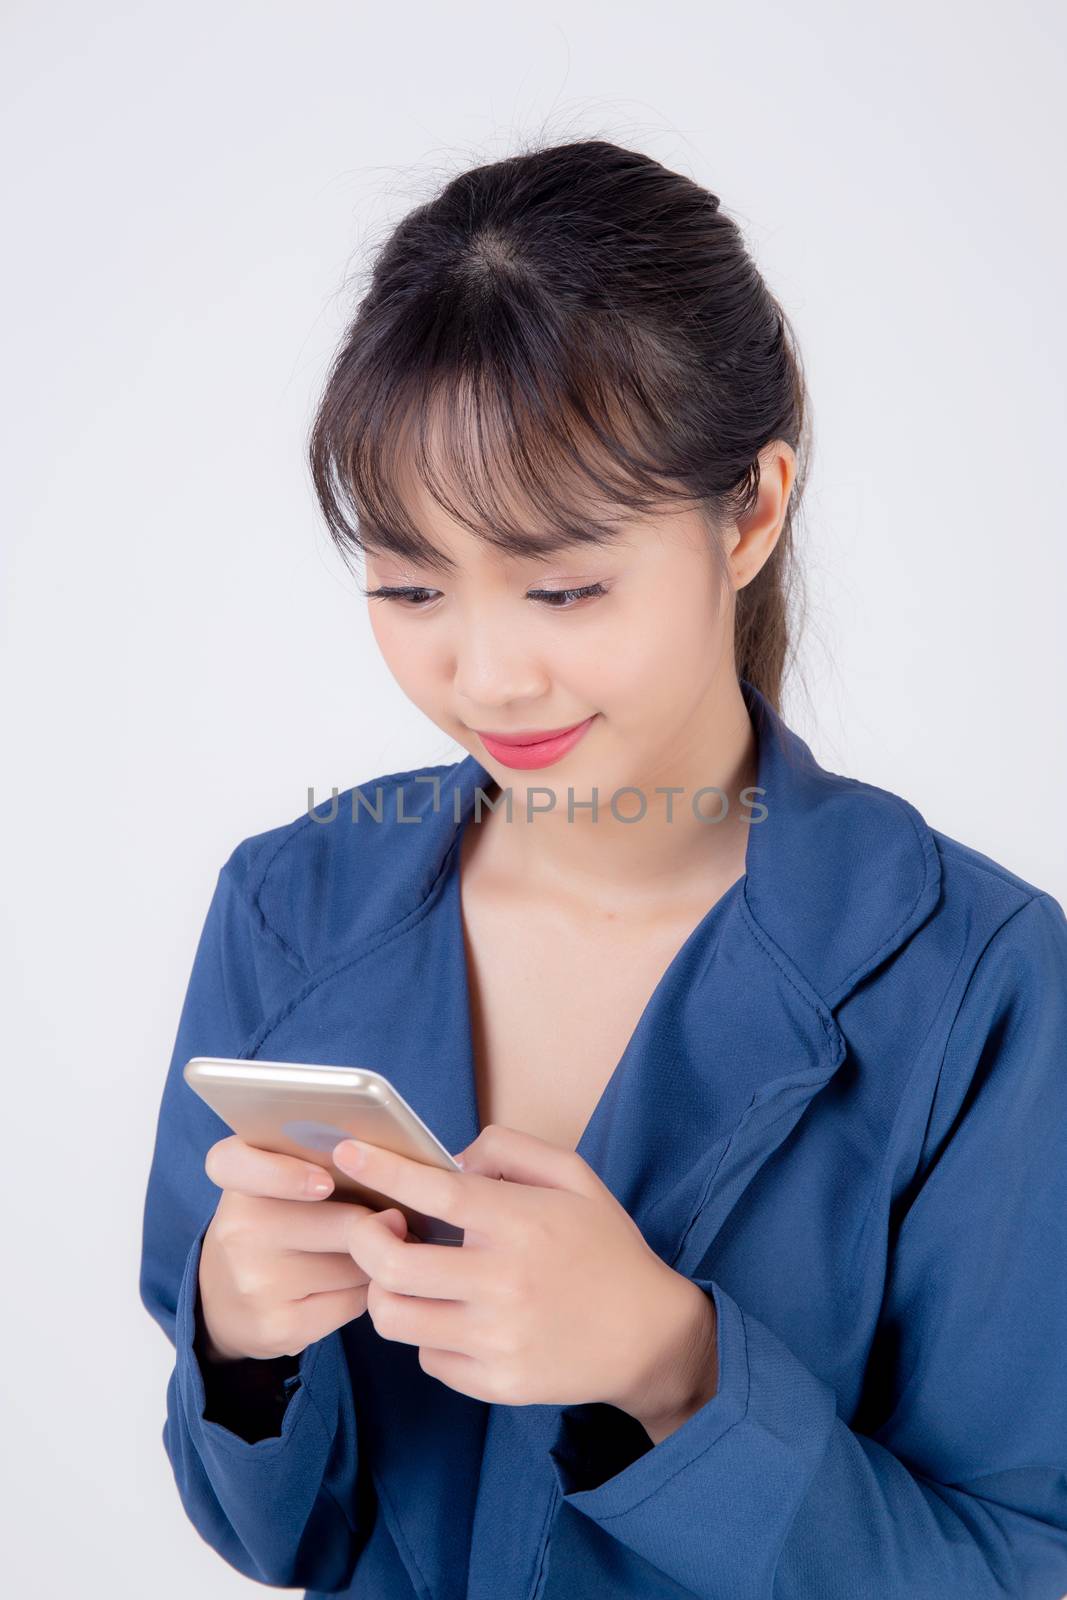 Beautiful portrait young business asian woman using smartphone isolated on white background, businesswoman looking and touch smart mobile phone on social media communication and technology concept.